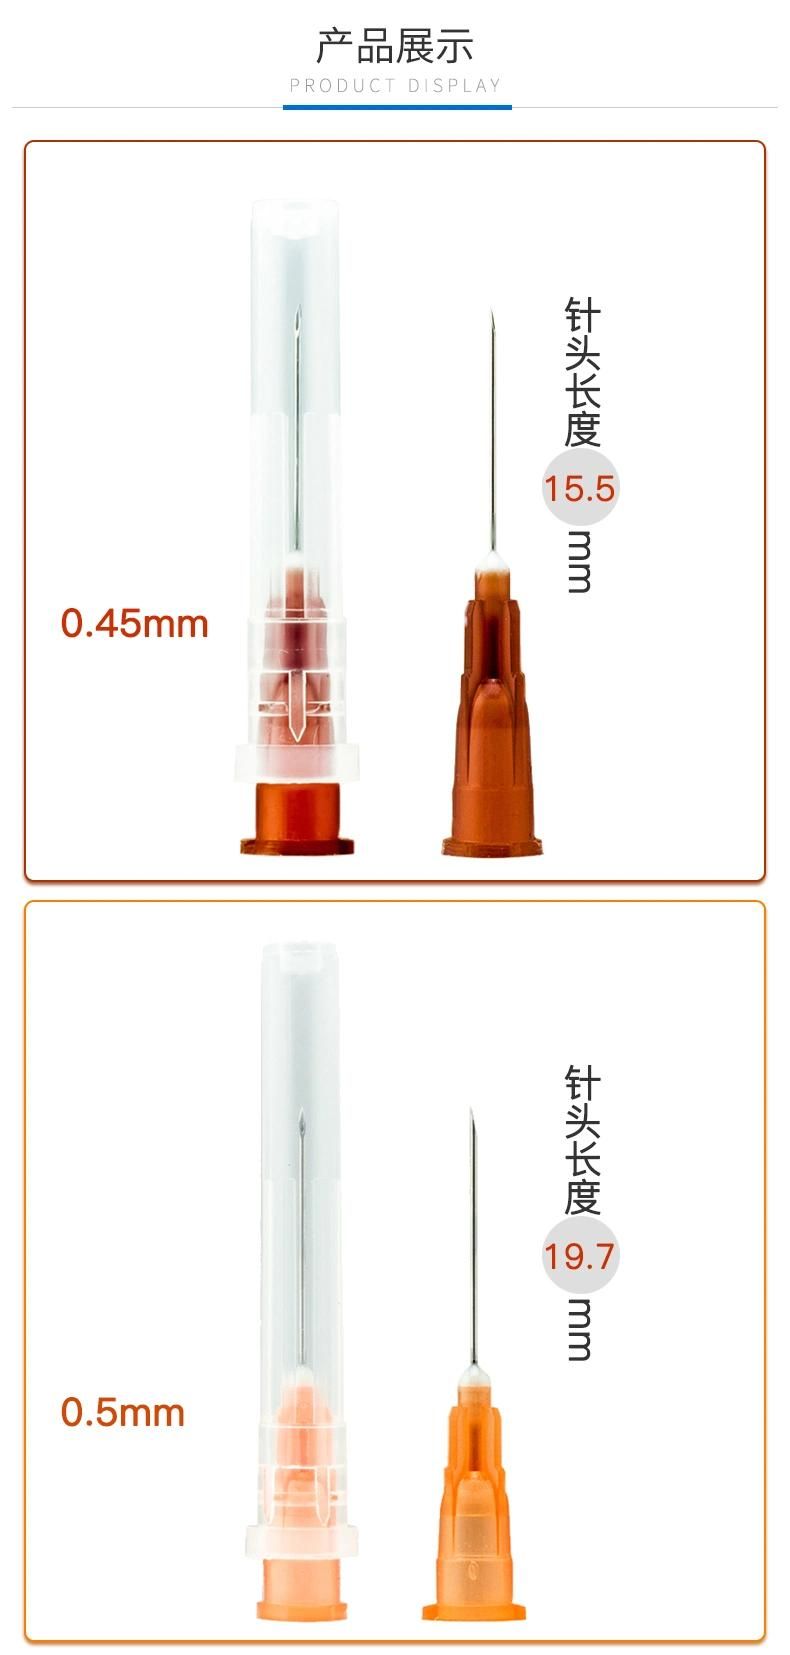 Disposable Medical Sterile Injection Needle 0.6mm*28.5mm Medical Syringe Needle Needle Device